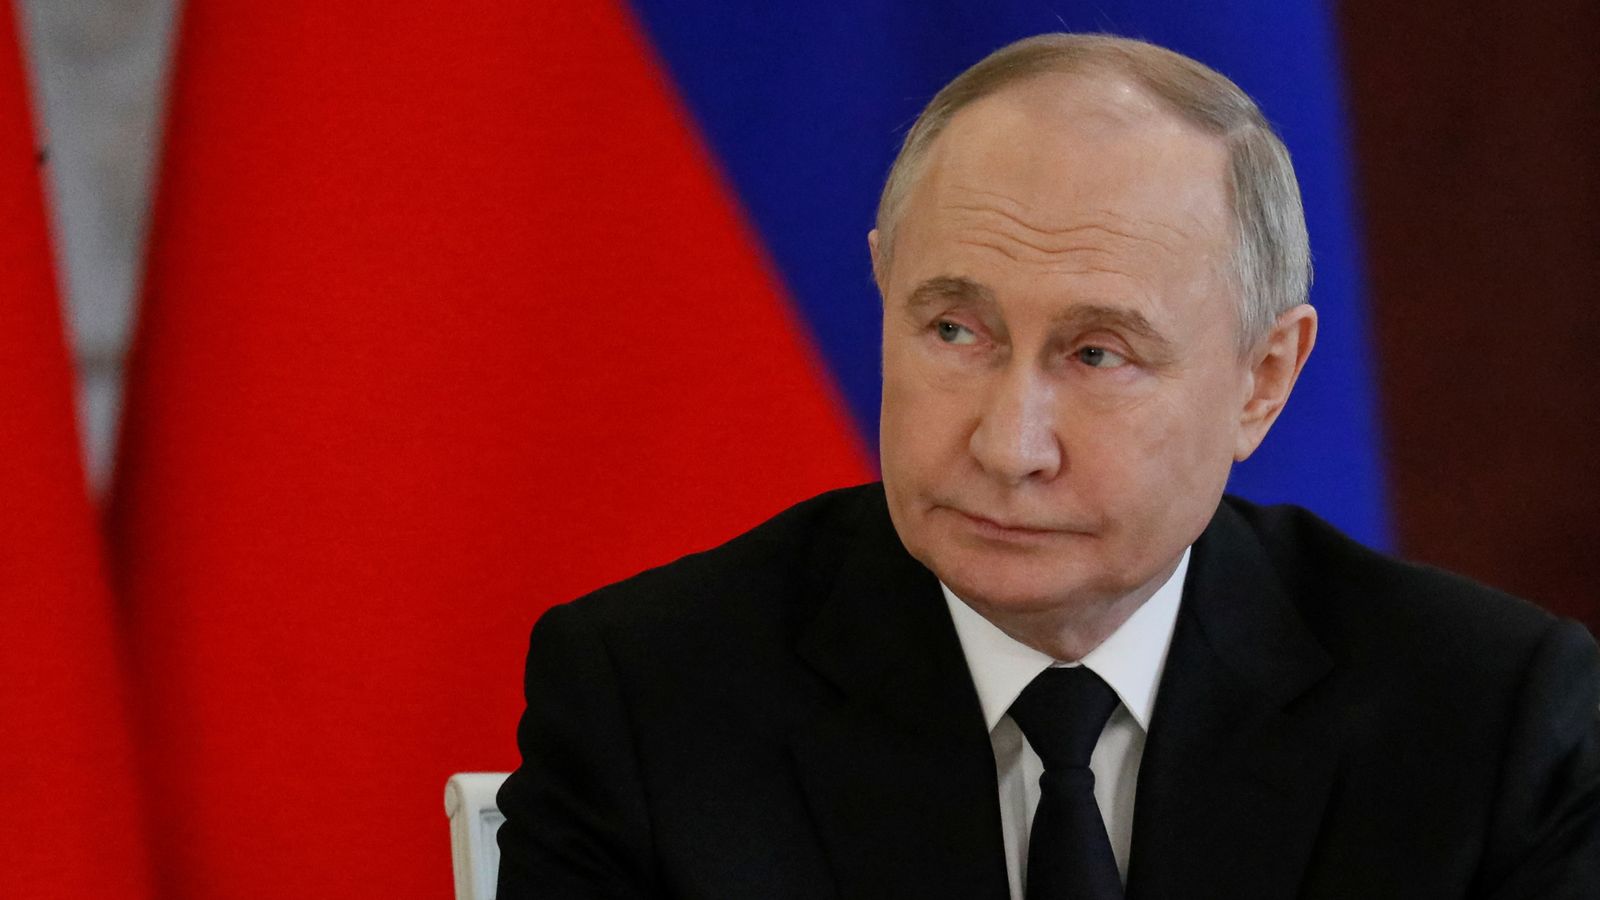 Vladimir Putin ready to ‘freeze’ war in Ukraine with ceasefire recognising recent Russian gains, sources say